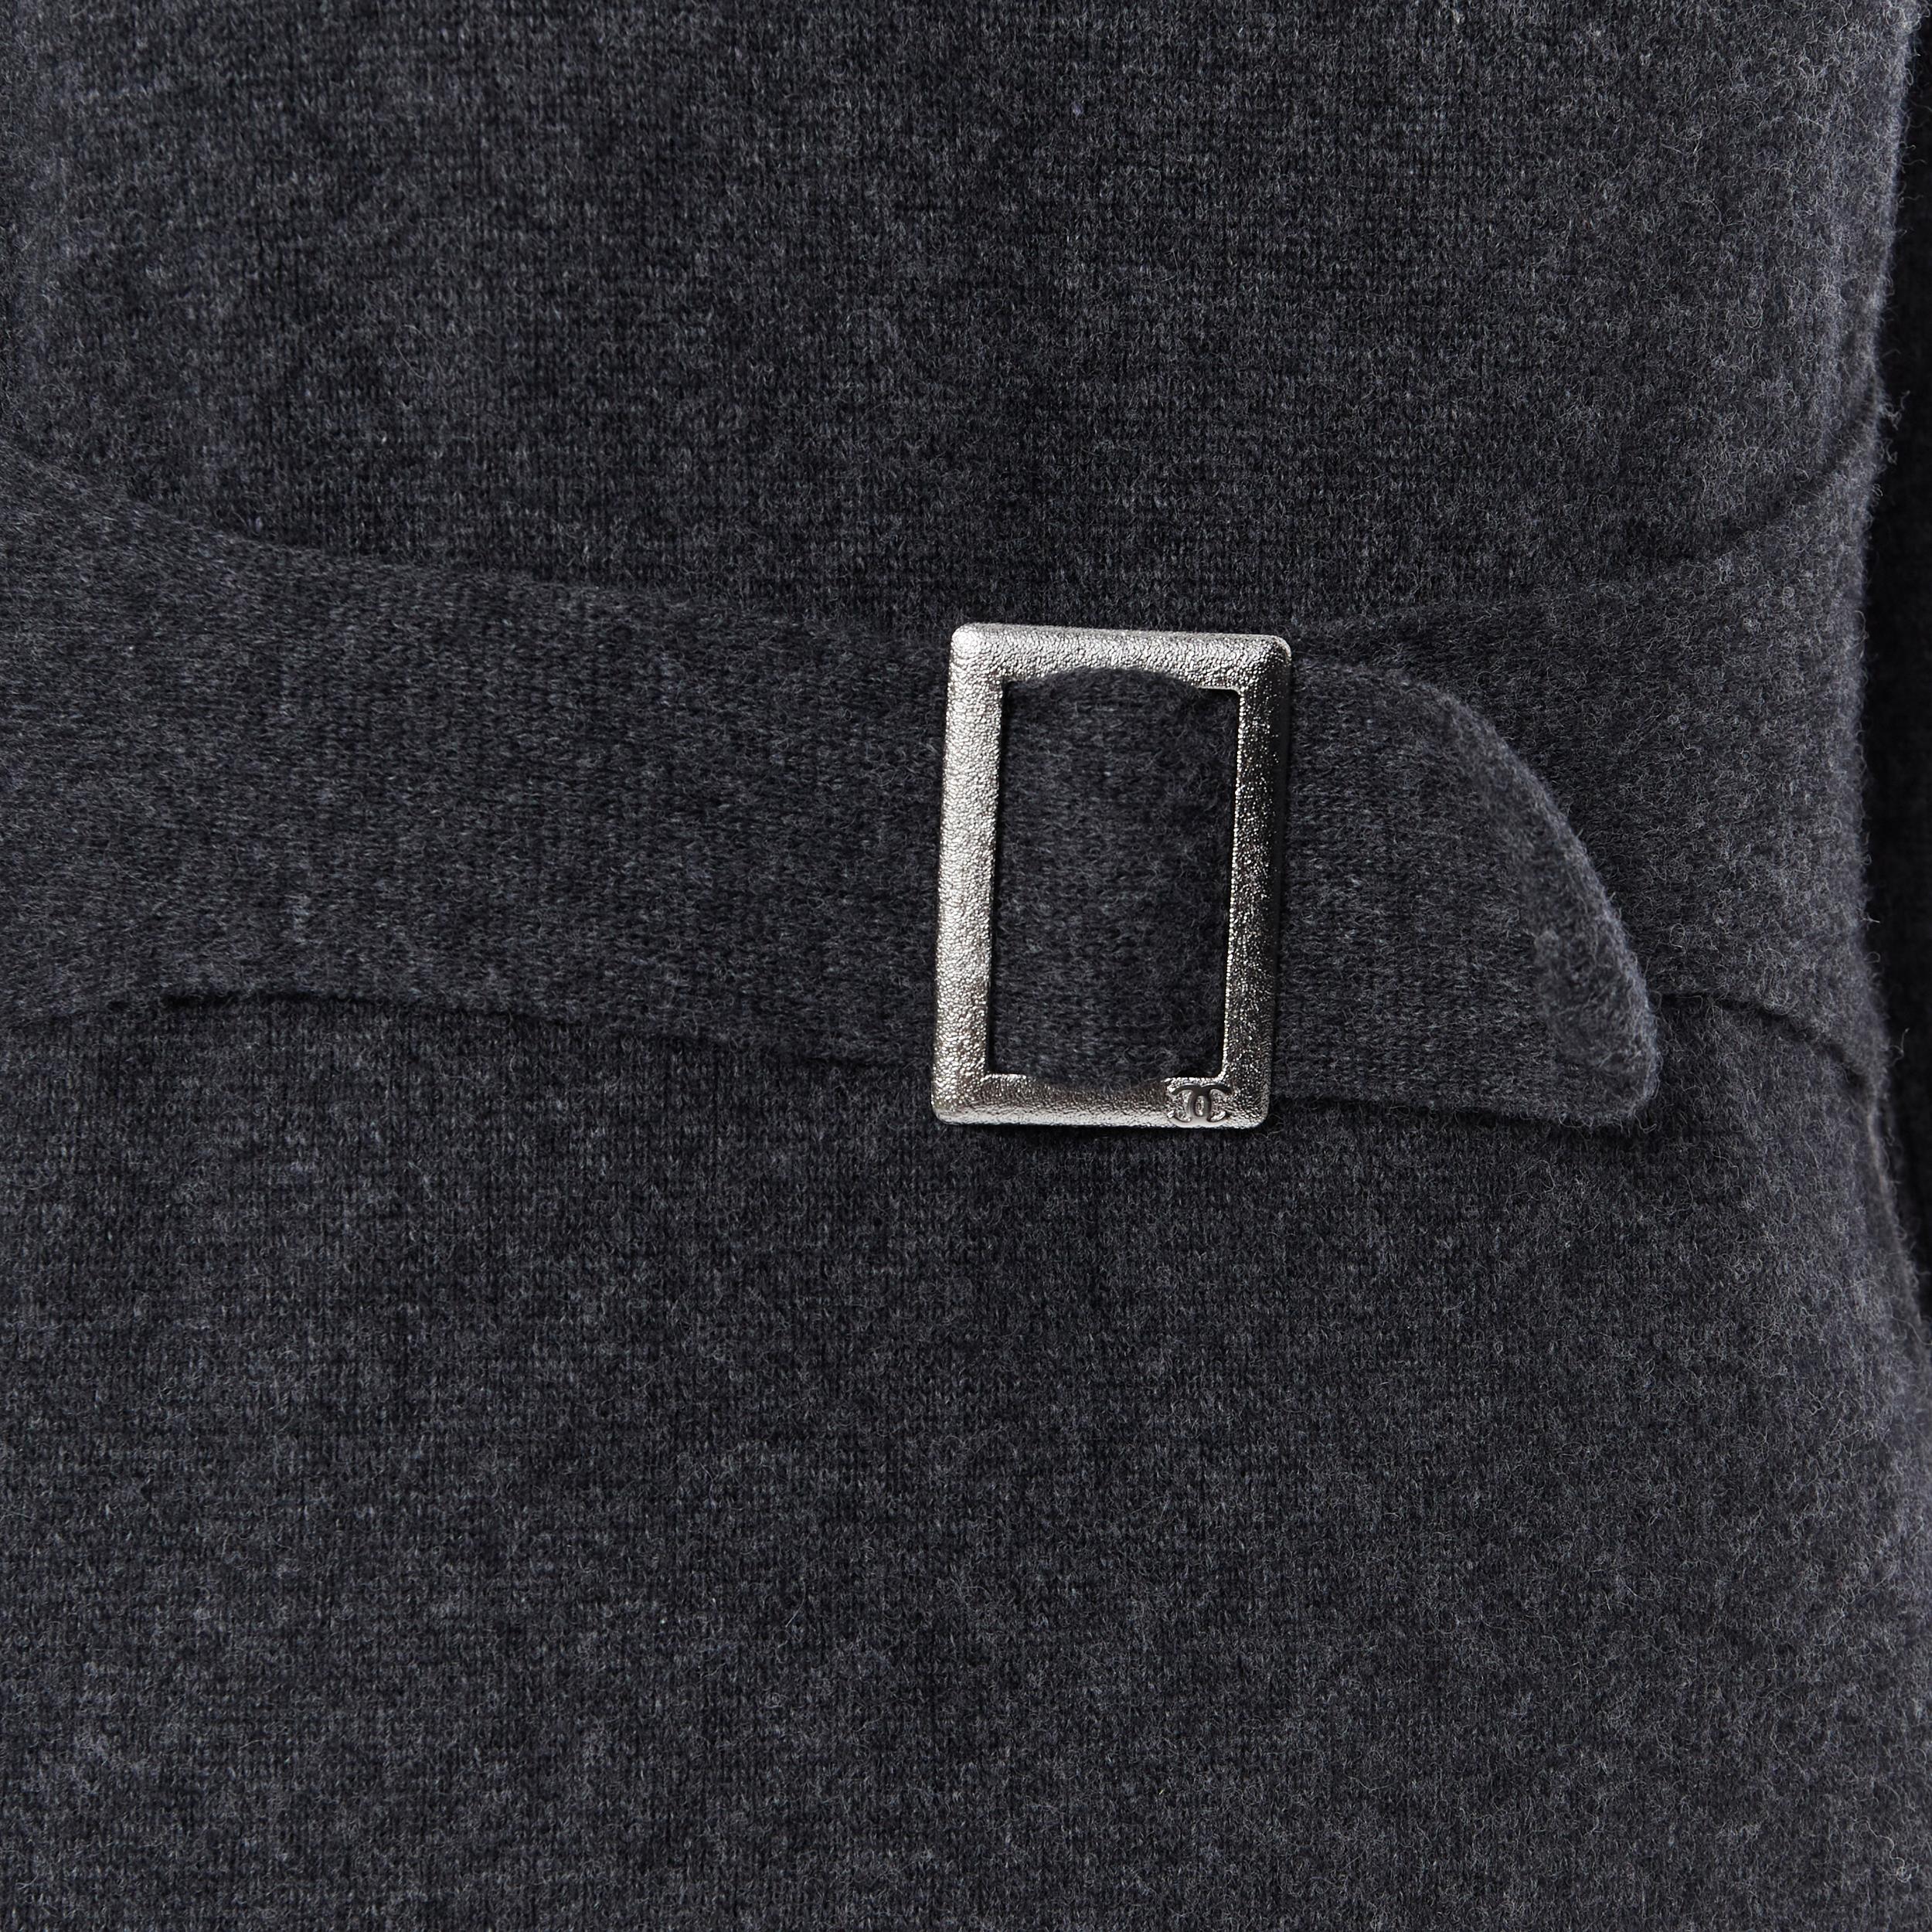 CHANEL 09A grey wool cashmere blend silver CC buckle design sweater dress FR38
Reference: TGAS/B00150
Brand: Chanel
Designer: Karl Lagerfeld
Collection: 09A 
Material: Wool
Color: Grey
Pattern: Solid
Closure: Buckle
Extra Detail: Grey cashmere wool